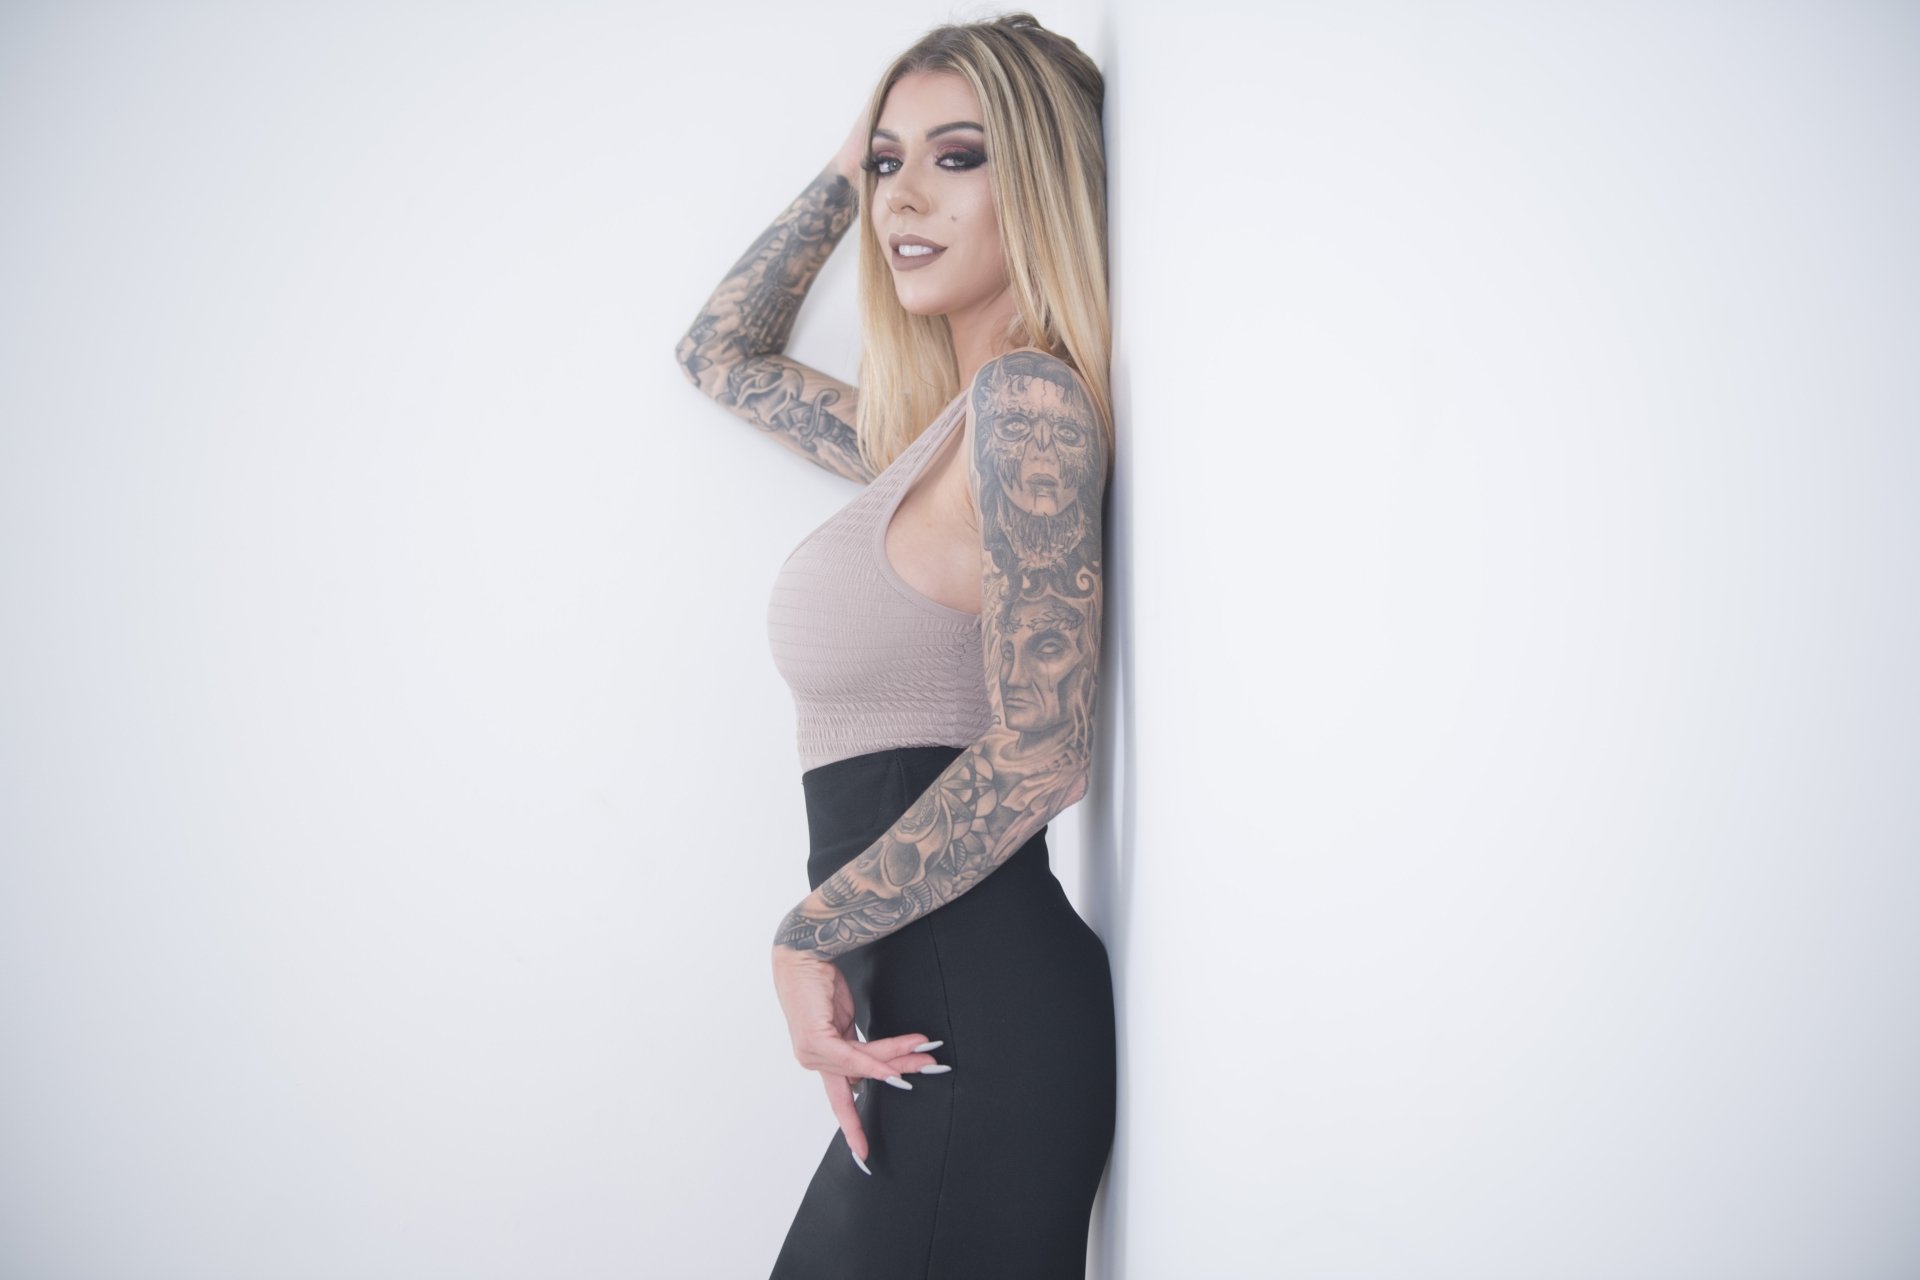 Karma Rx HD Wallpapers and Backgrounds.